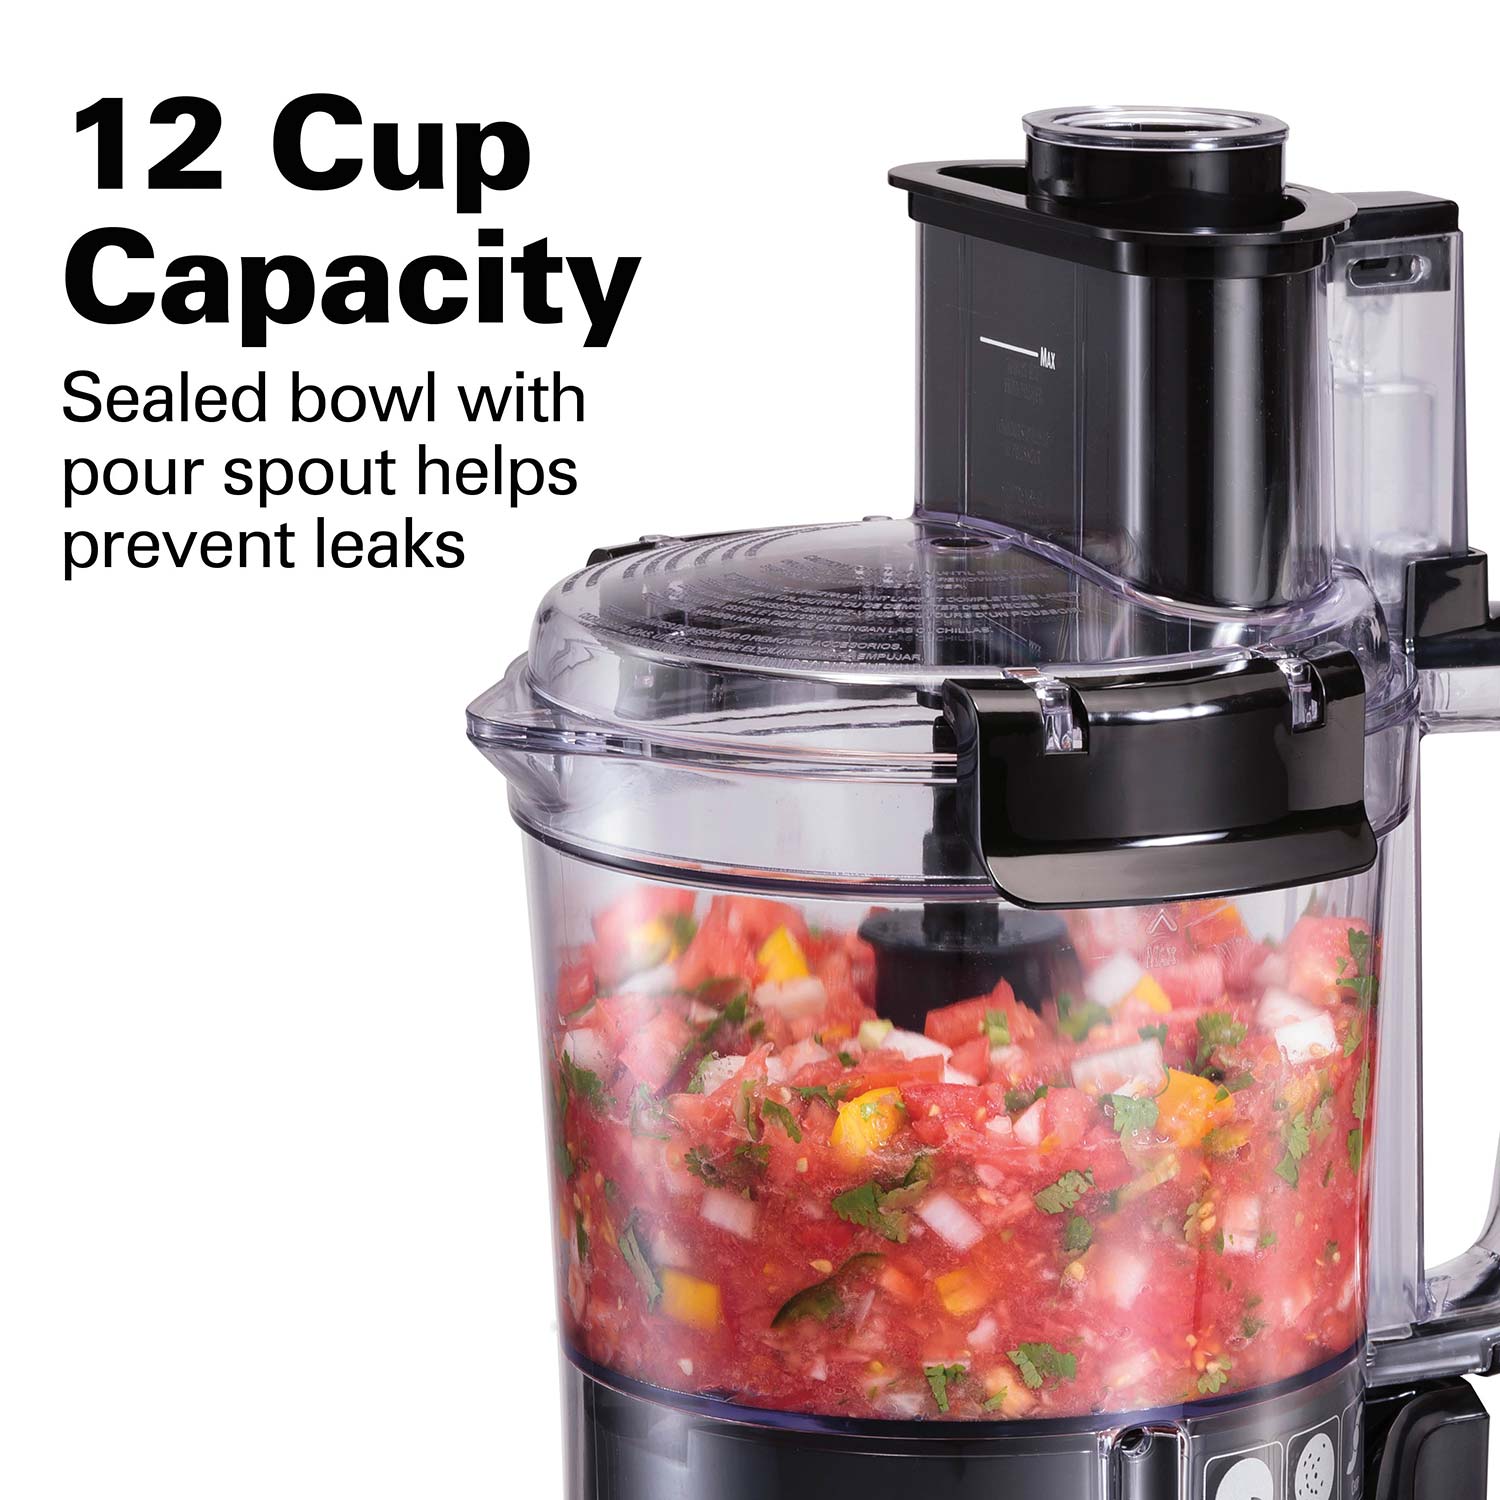 Hamilton Beach Stack and Snap 12 Cup Food Processor Black 70724